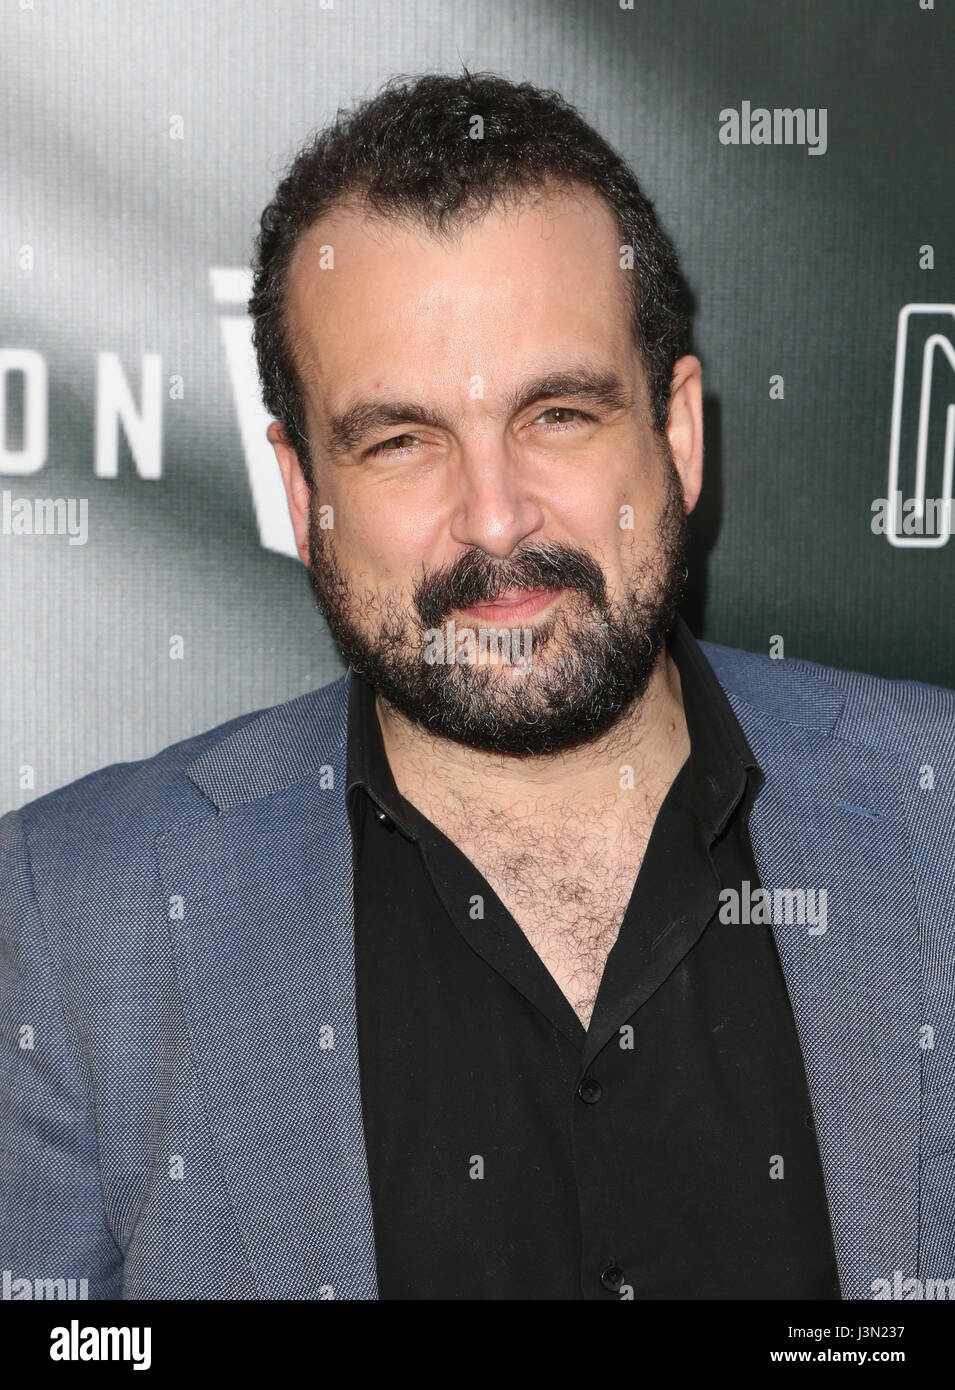 Premiere of Neon's 'Colossal' - Arrivals Featuring: Nacho Vigalondo Where: Los Angeles, California, United States When: 05 Apr 2017 Stock Photo